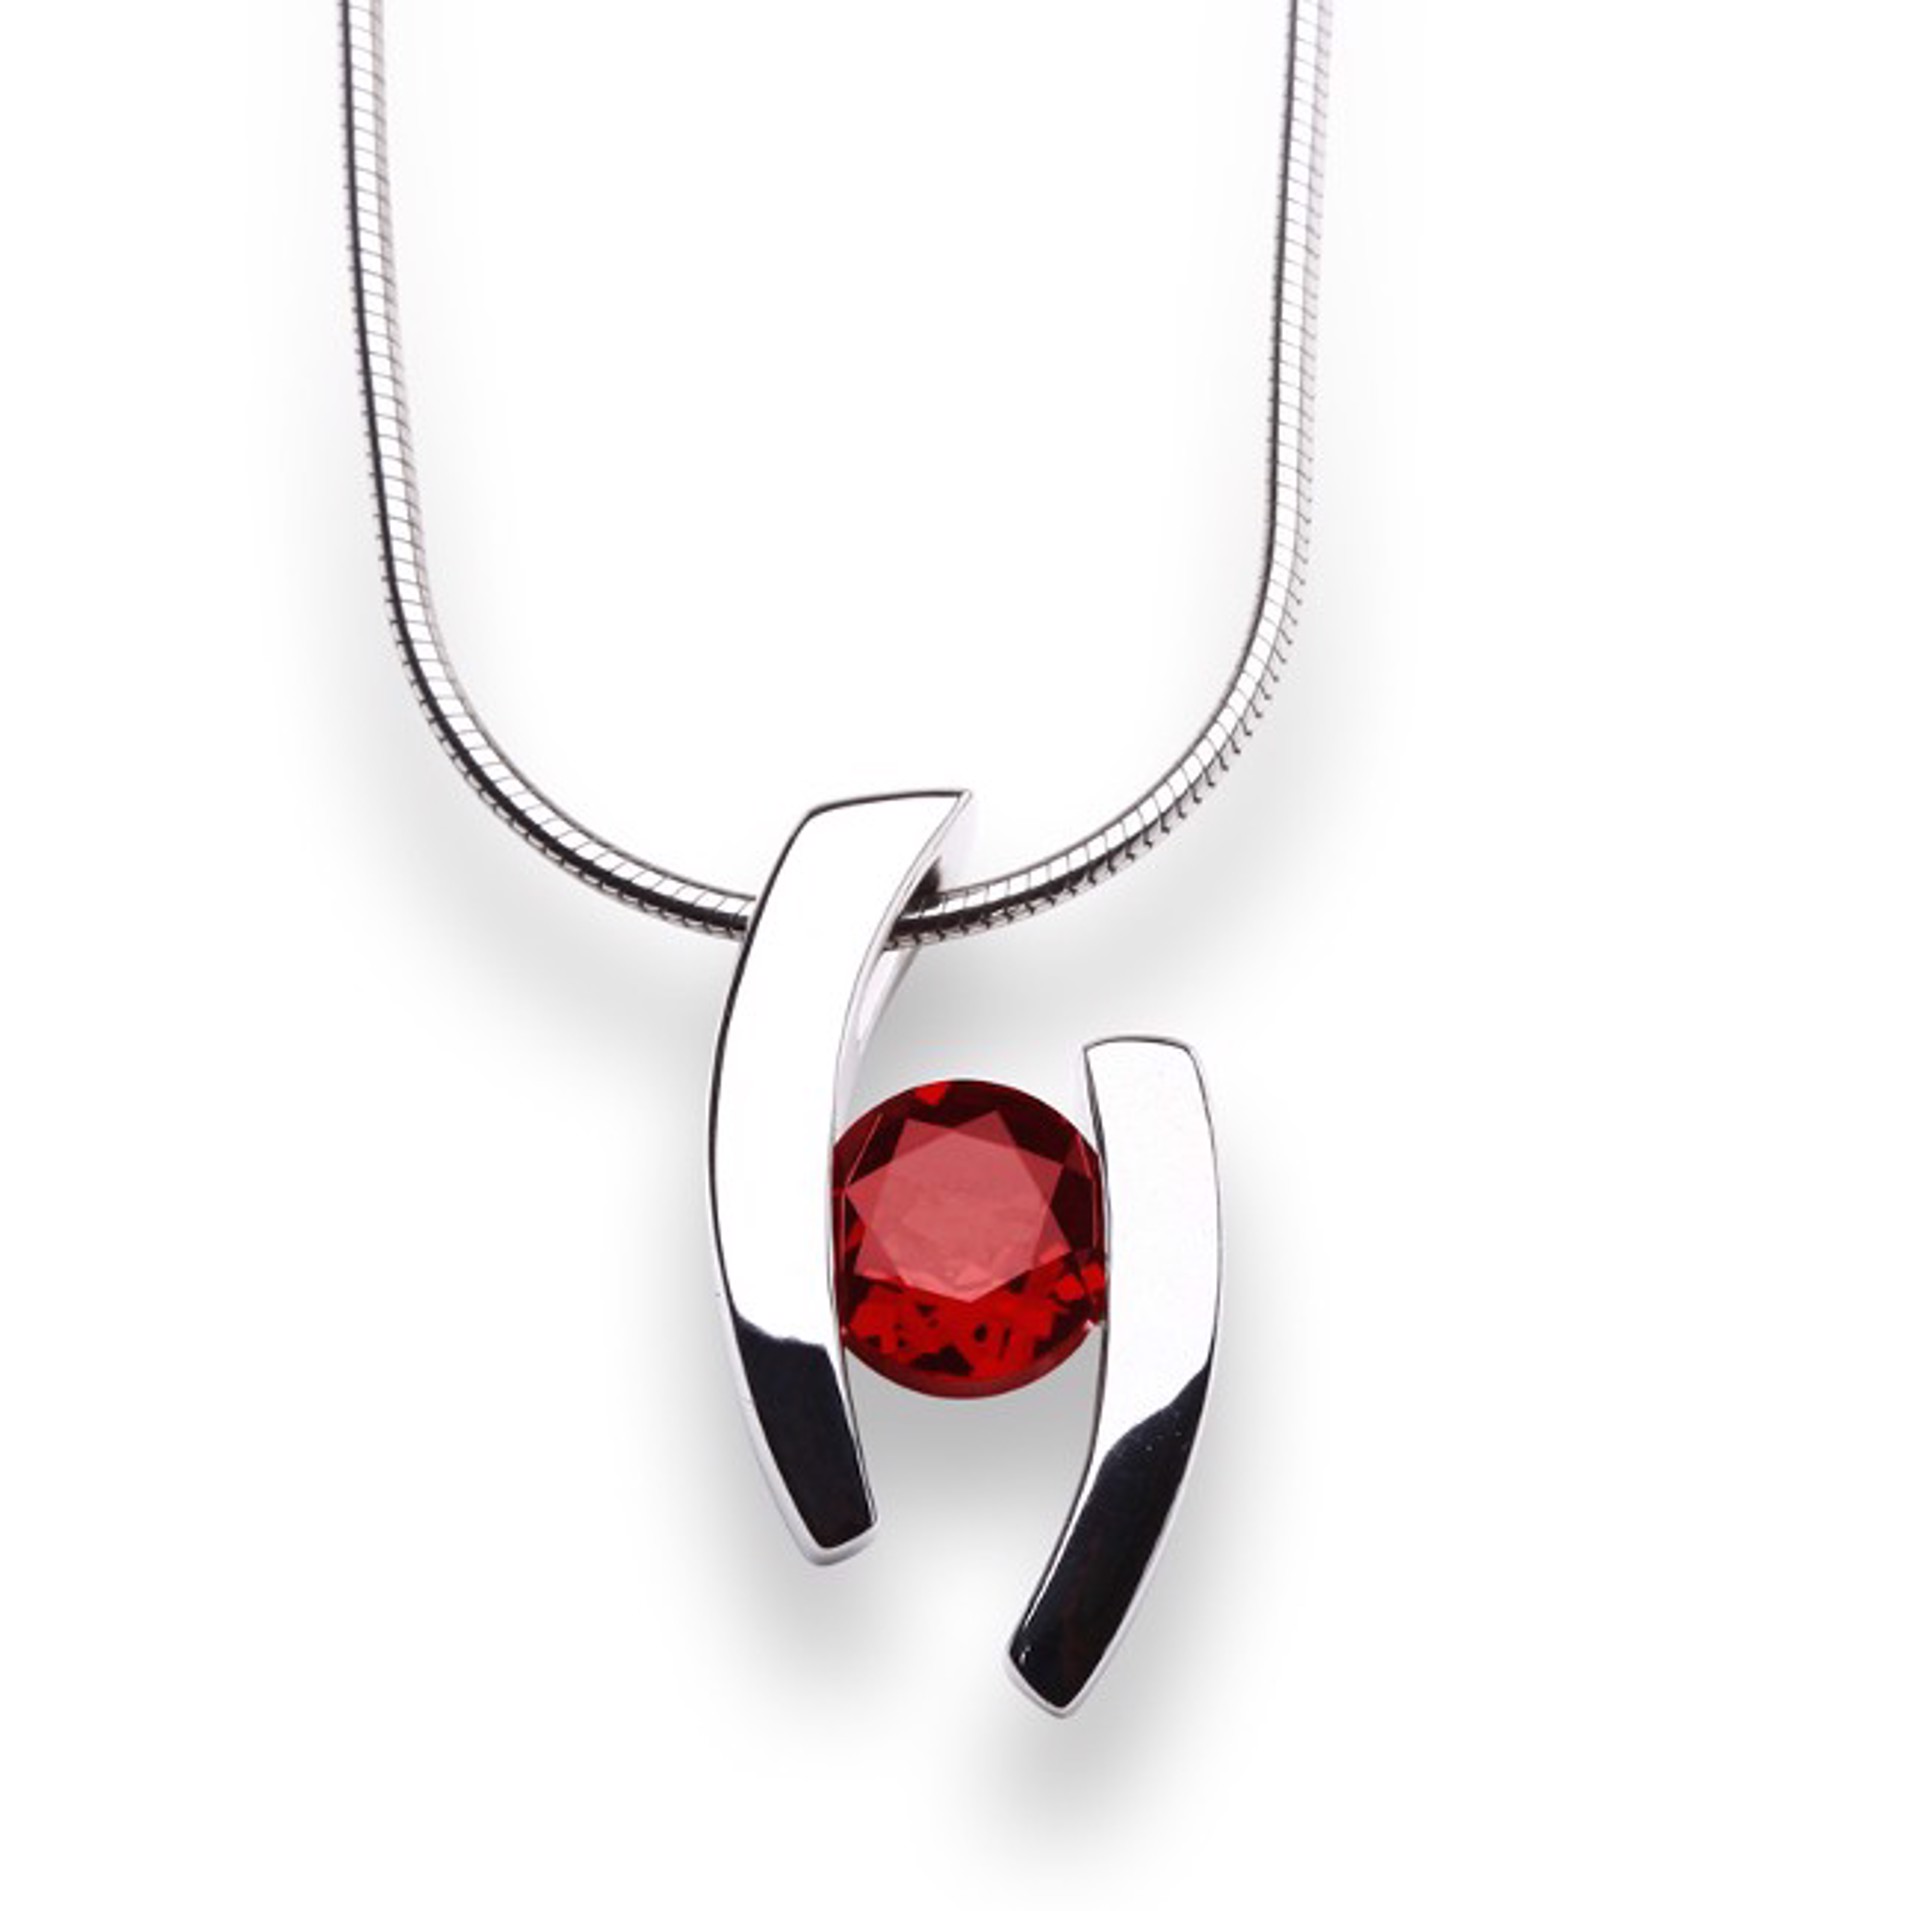 Pendant-Floating Garnet and Sterling Silver by Joryel Vera